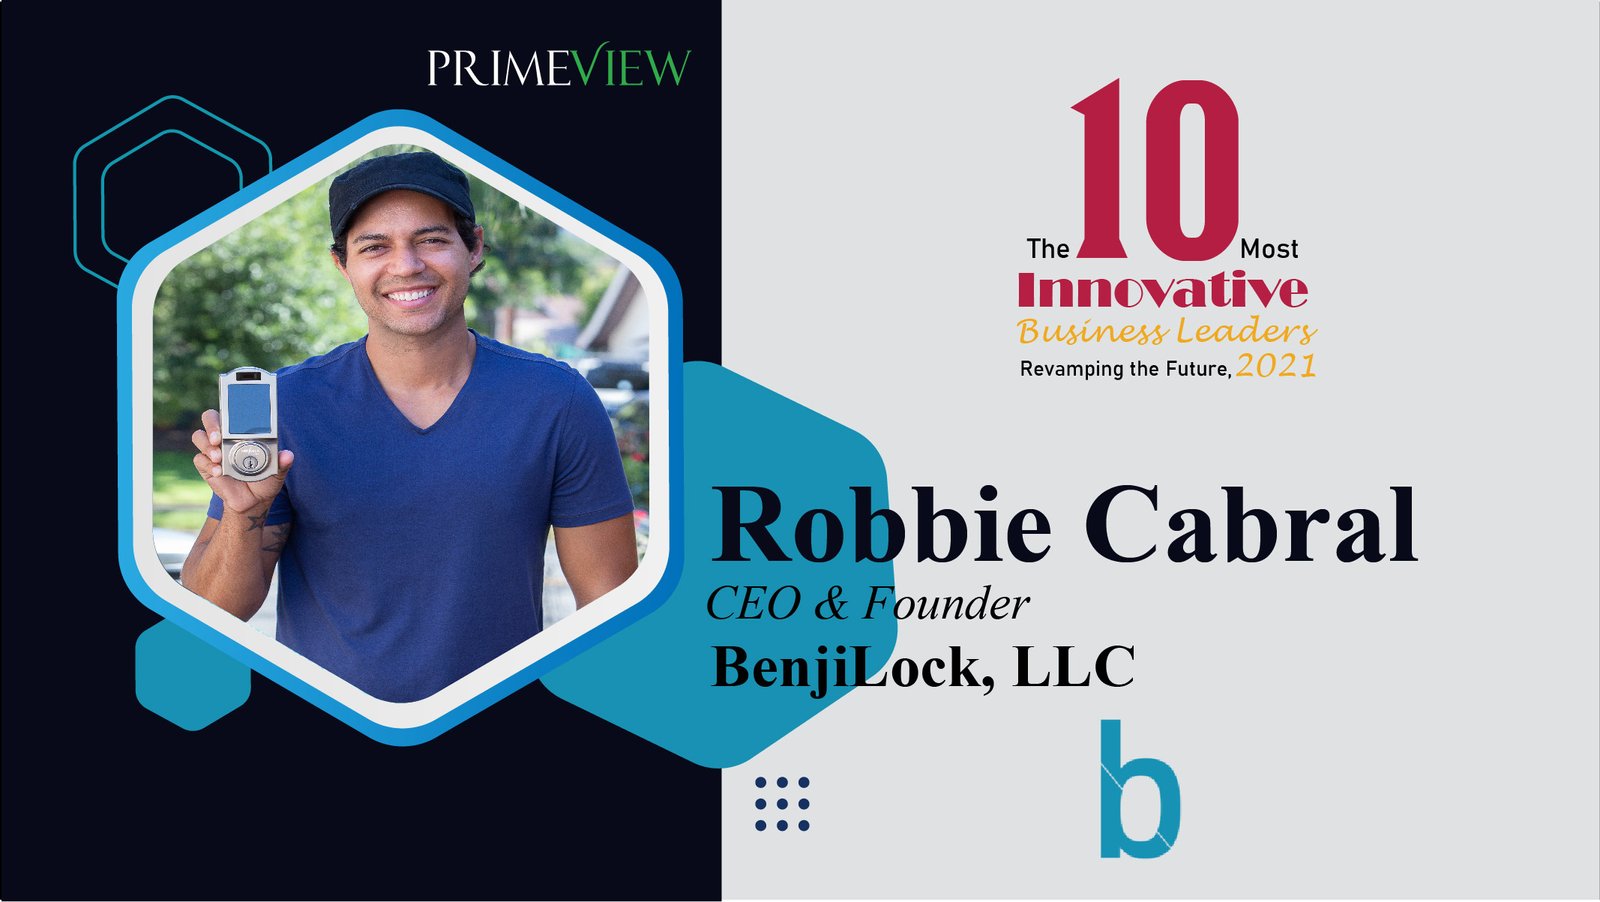 CEO & Founder | BenjiLock | Robbie Cabral | The 10 Most Innovative Business Leaders Revamping the Future, 2021